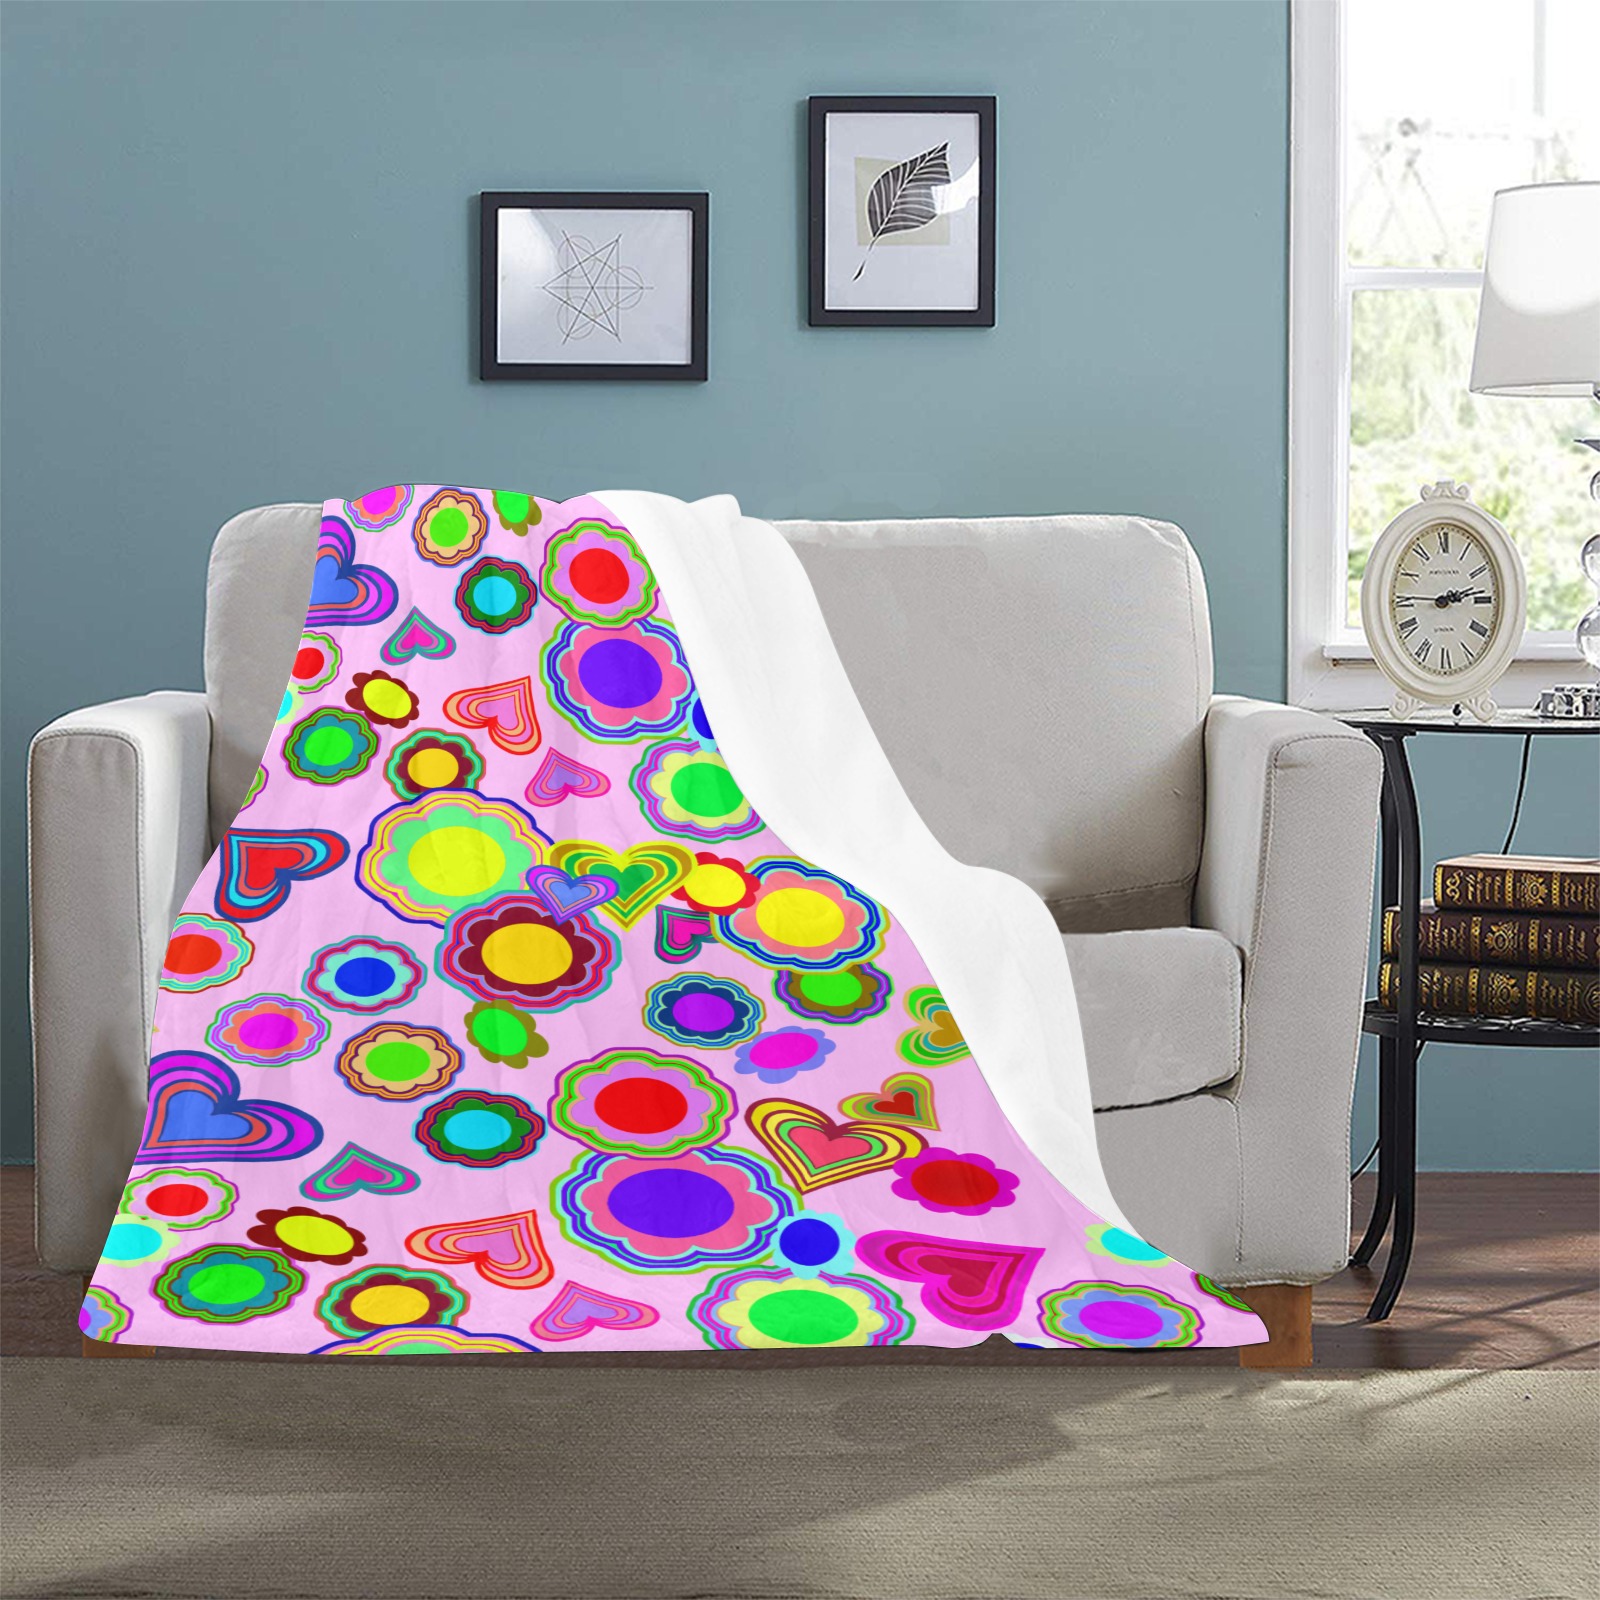 Groovy Hearts and Flowers Pink Ultra-Soft Micro Fleece Blanket 32"x48"